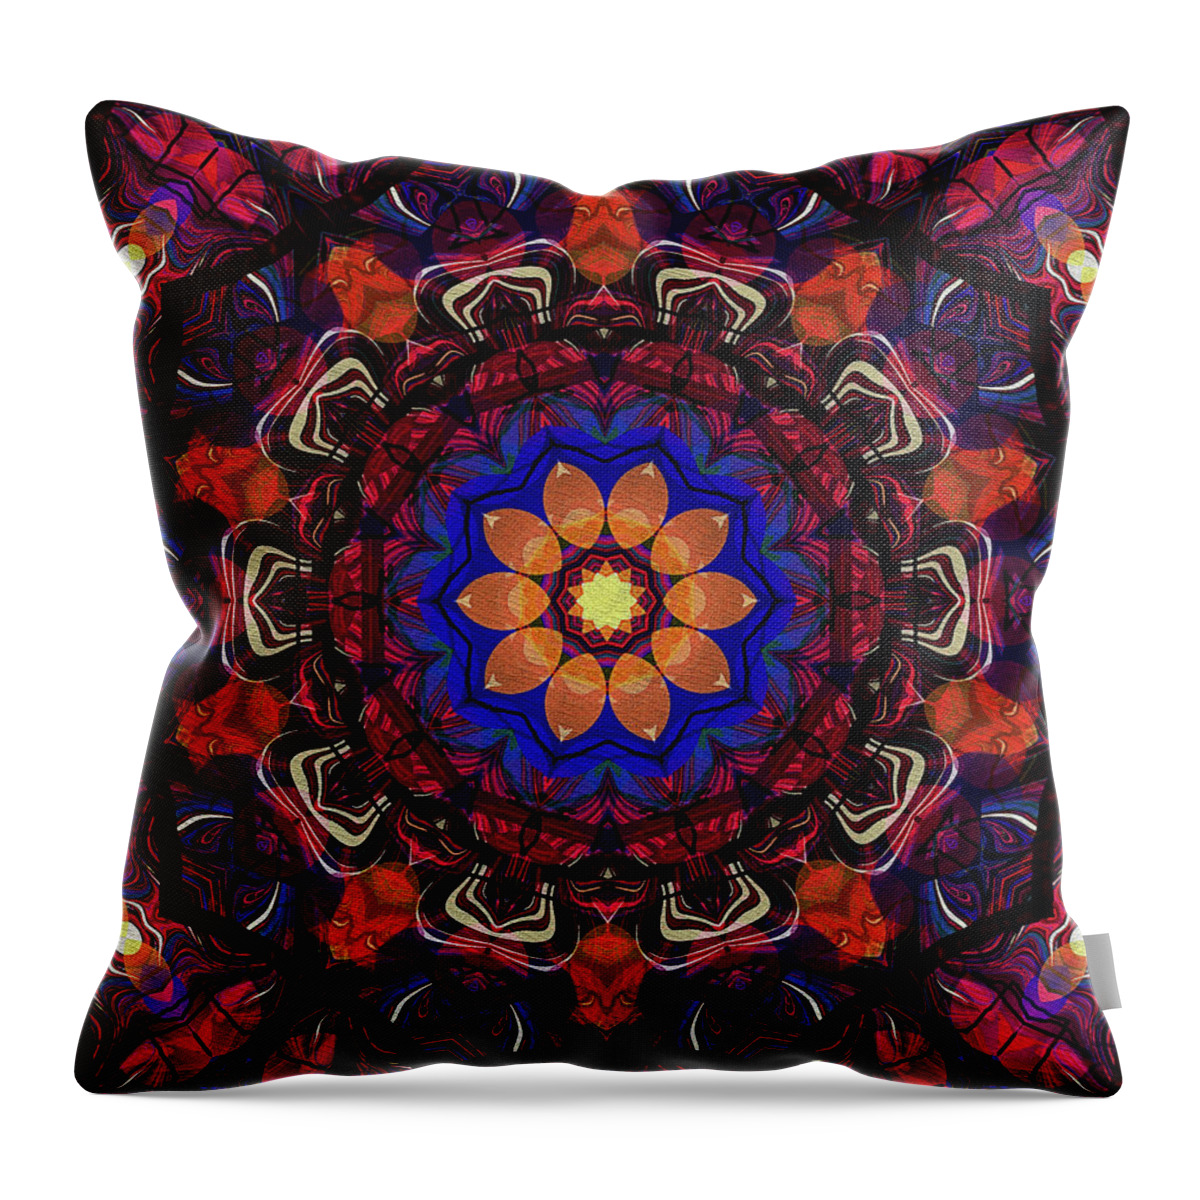 Colors Throw Pillow featuring the painting Wheel of Time by Natalie Holland